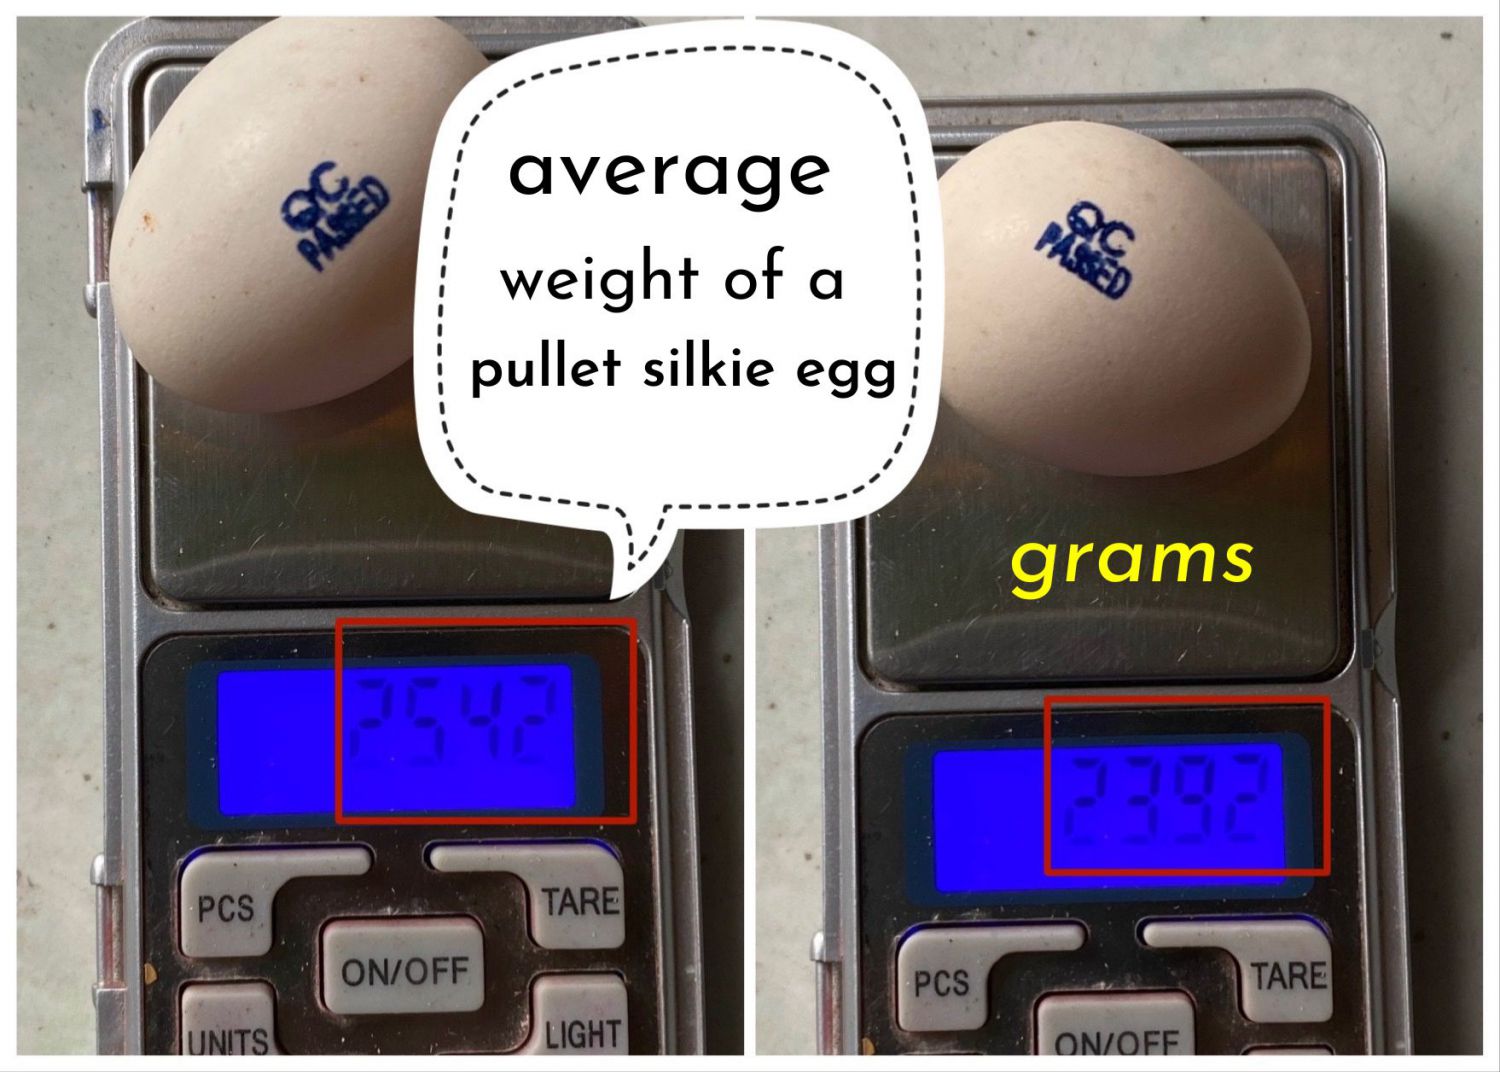 The average weight of a pullet silkie egg (aka first egg)